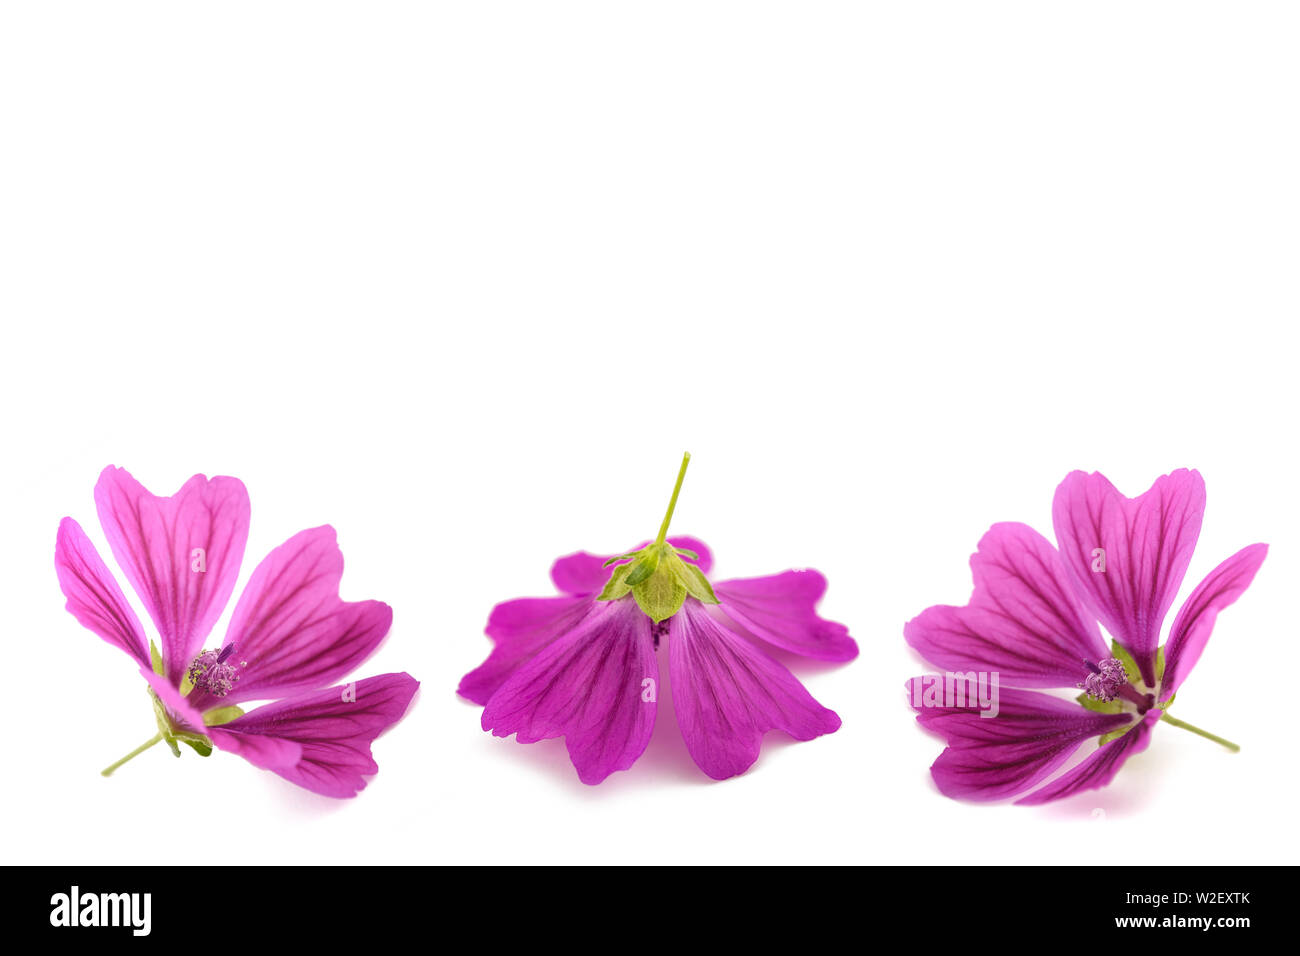 Mallow flowers isolated on white background Stock Photo